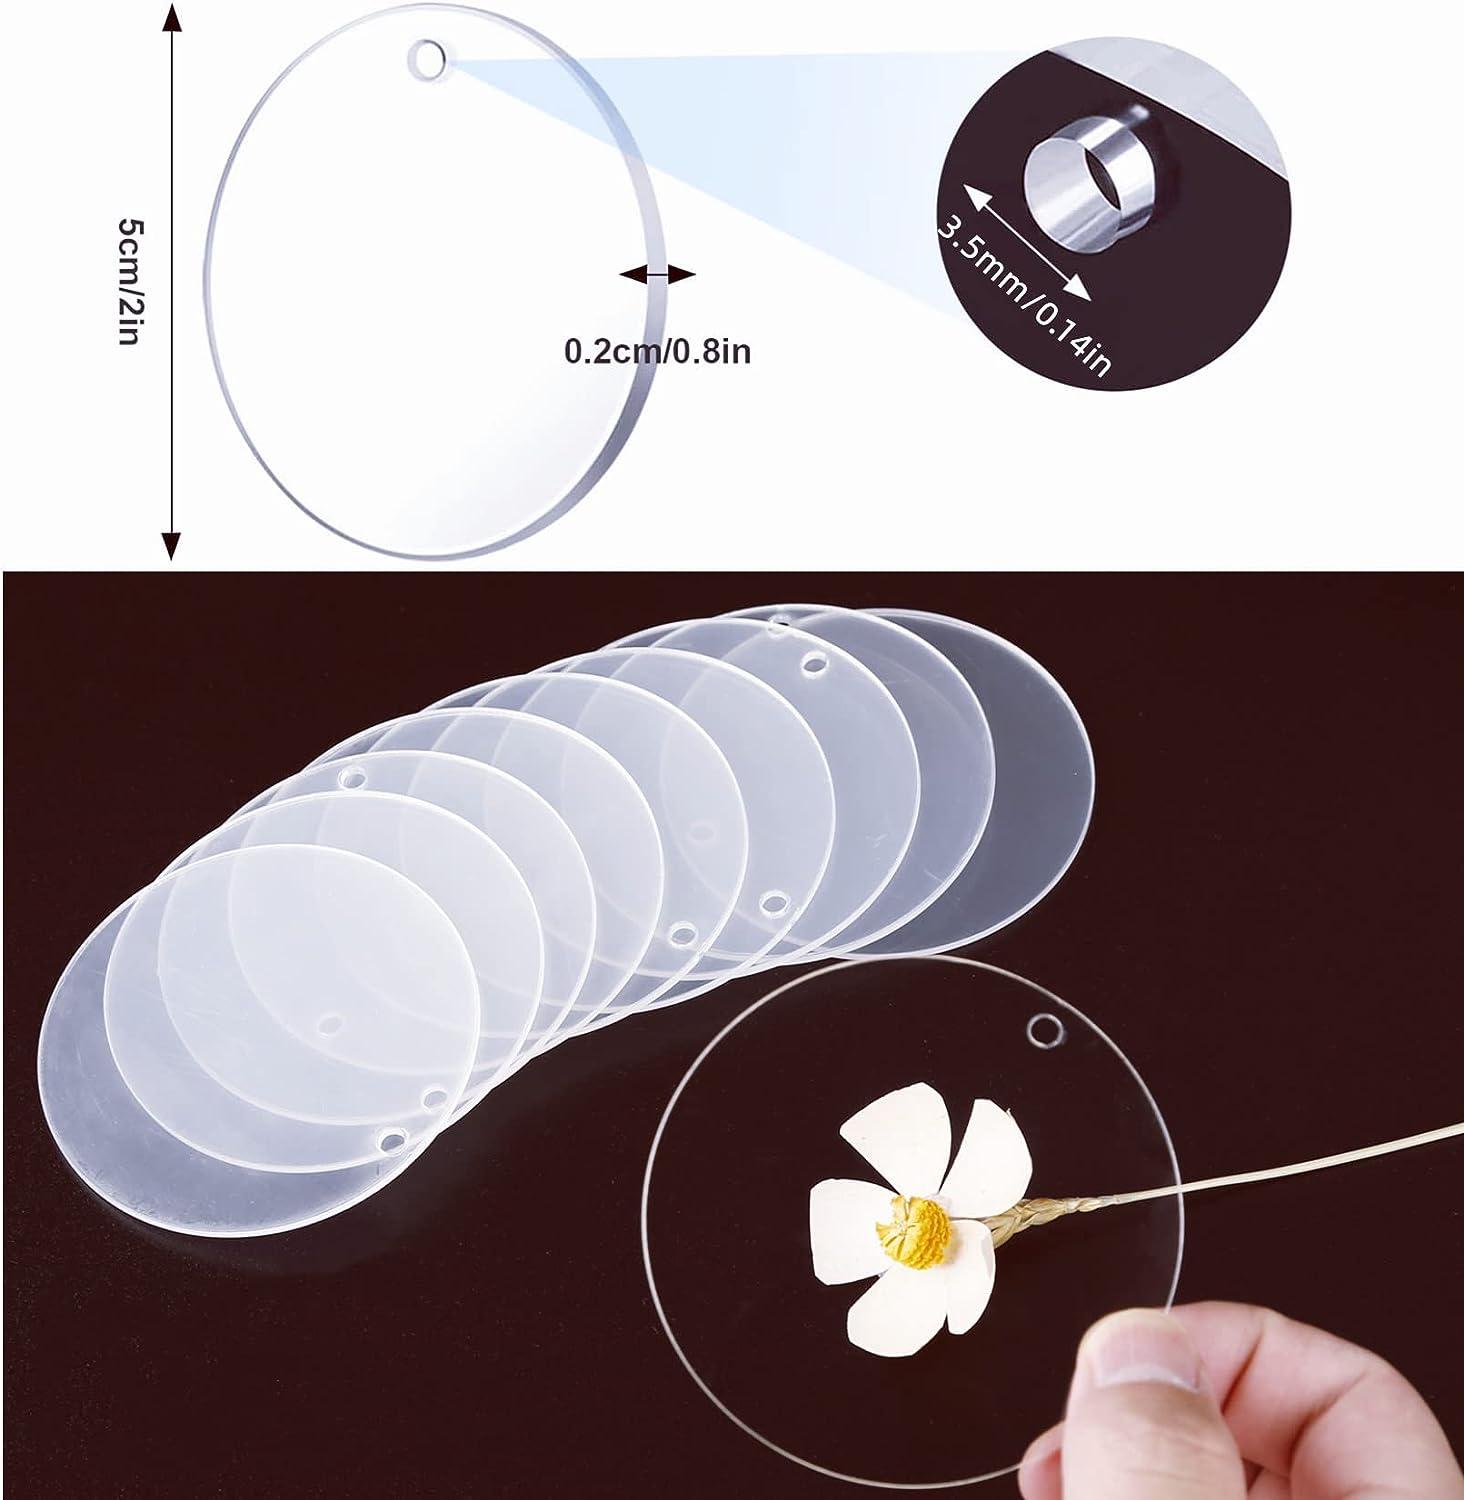 Acrylic Blank Discs, Flat Round, for DIY Keychains or tags (20 pieces)